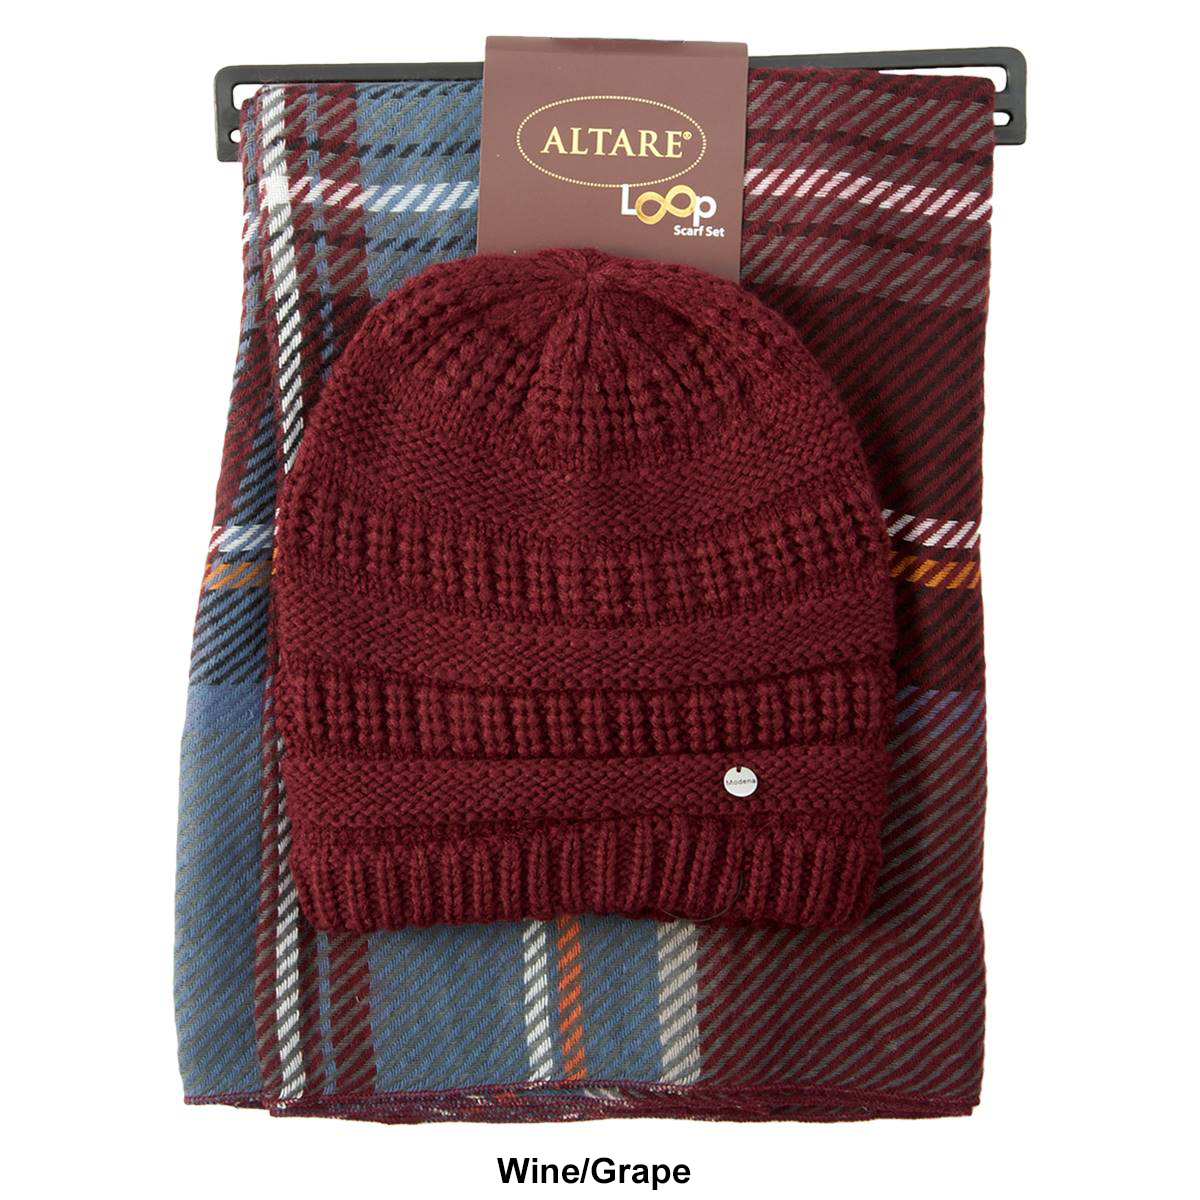 Womens Altare Solid Knit Hat And Plaid Scarf Set